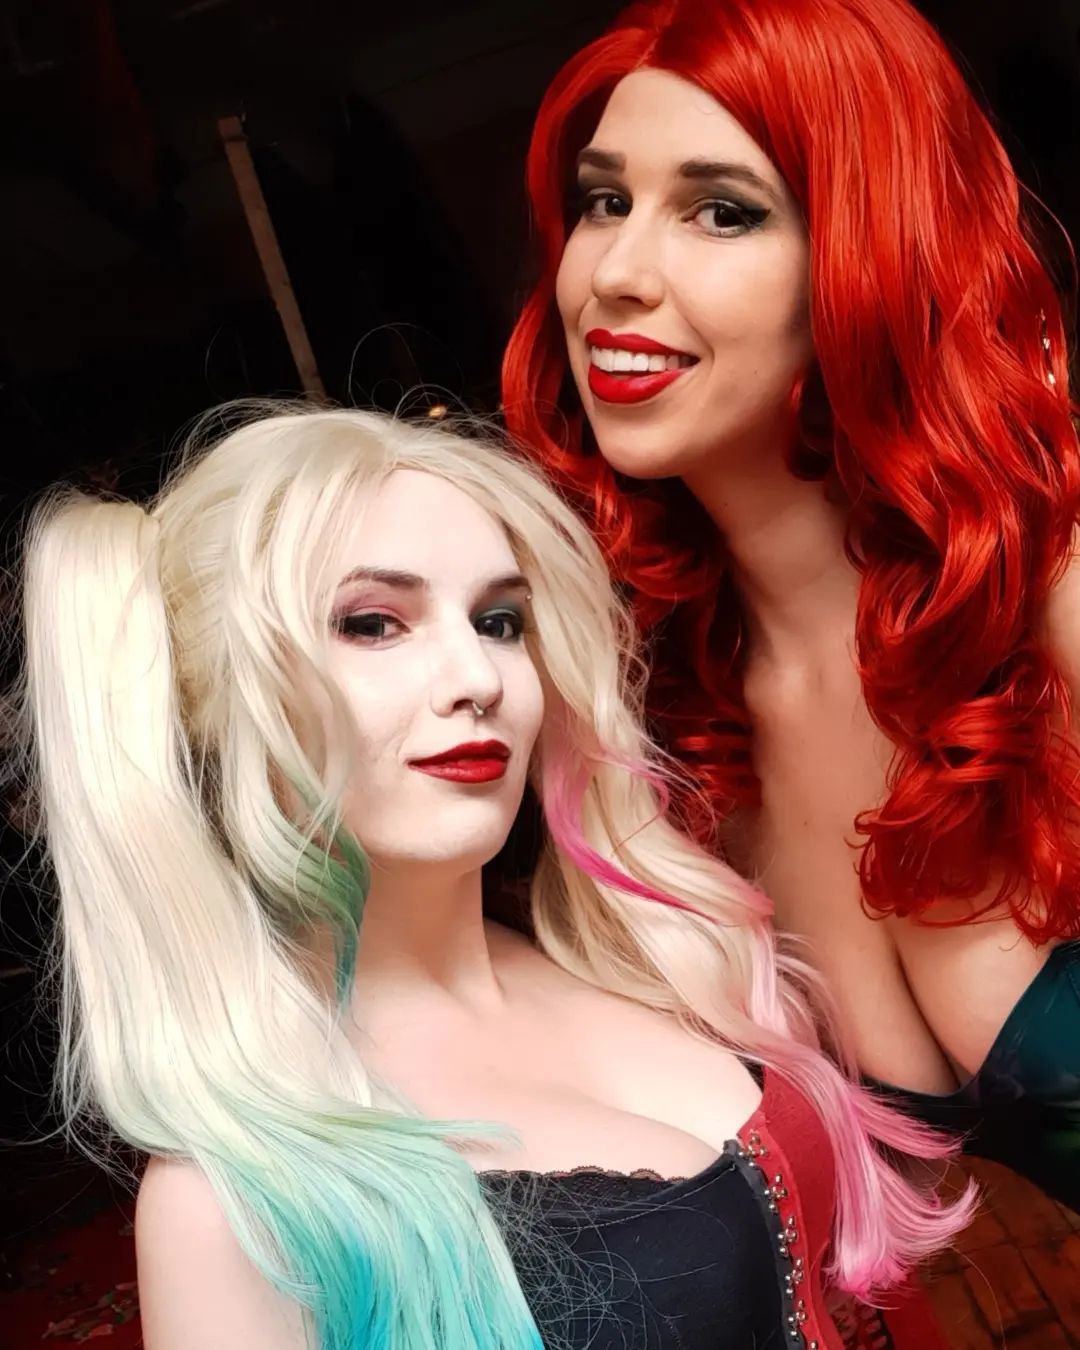 Happy Pride Month from everybody's favorite "roommates" ! 🏳️‍🌈🏳️‍🌈🏳️‍🌈
*
*
*
#harleyquinncosplay #harleyquinn #poisonivy #poisonivycosplay #dccomics #dccosplay